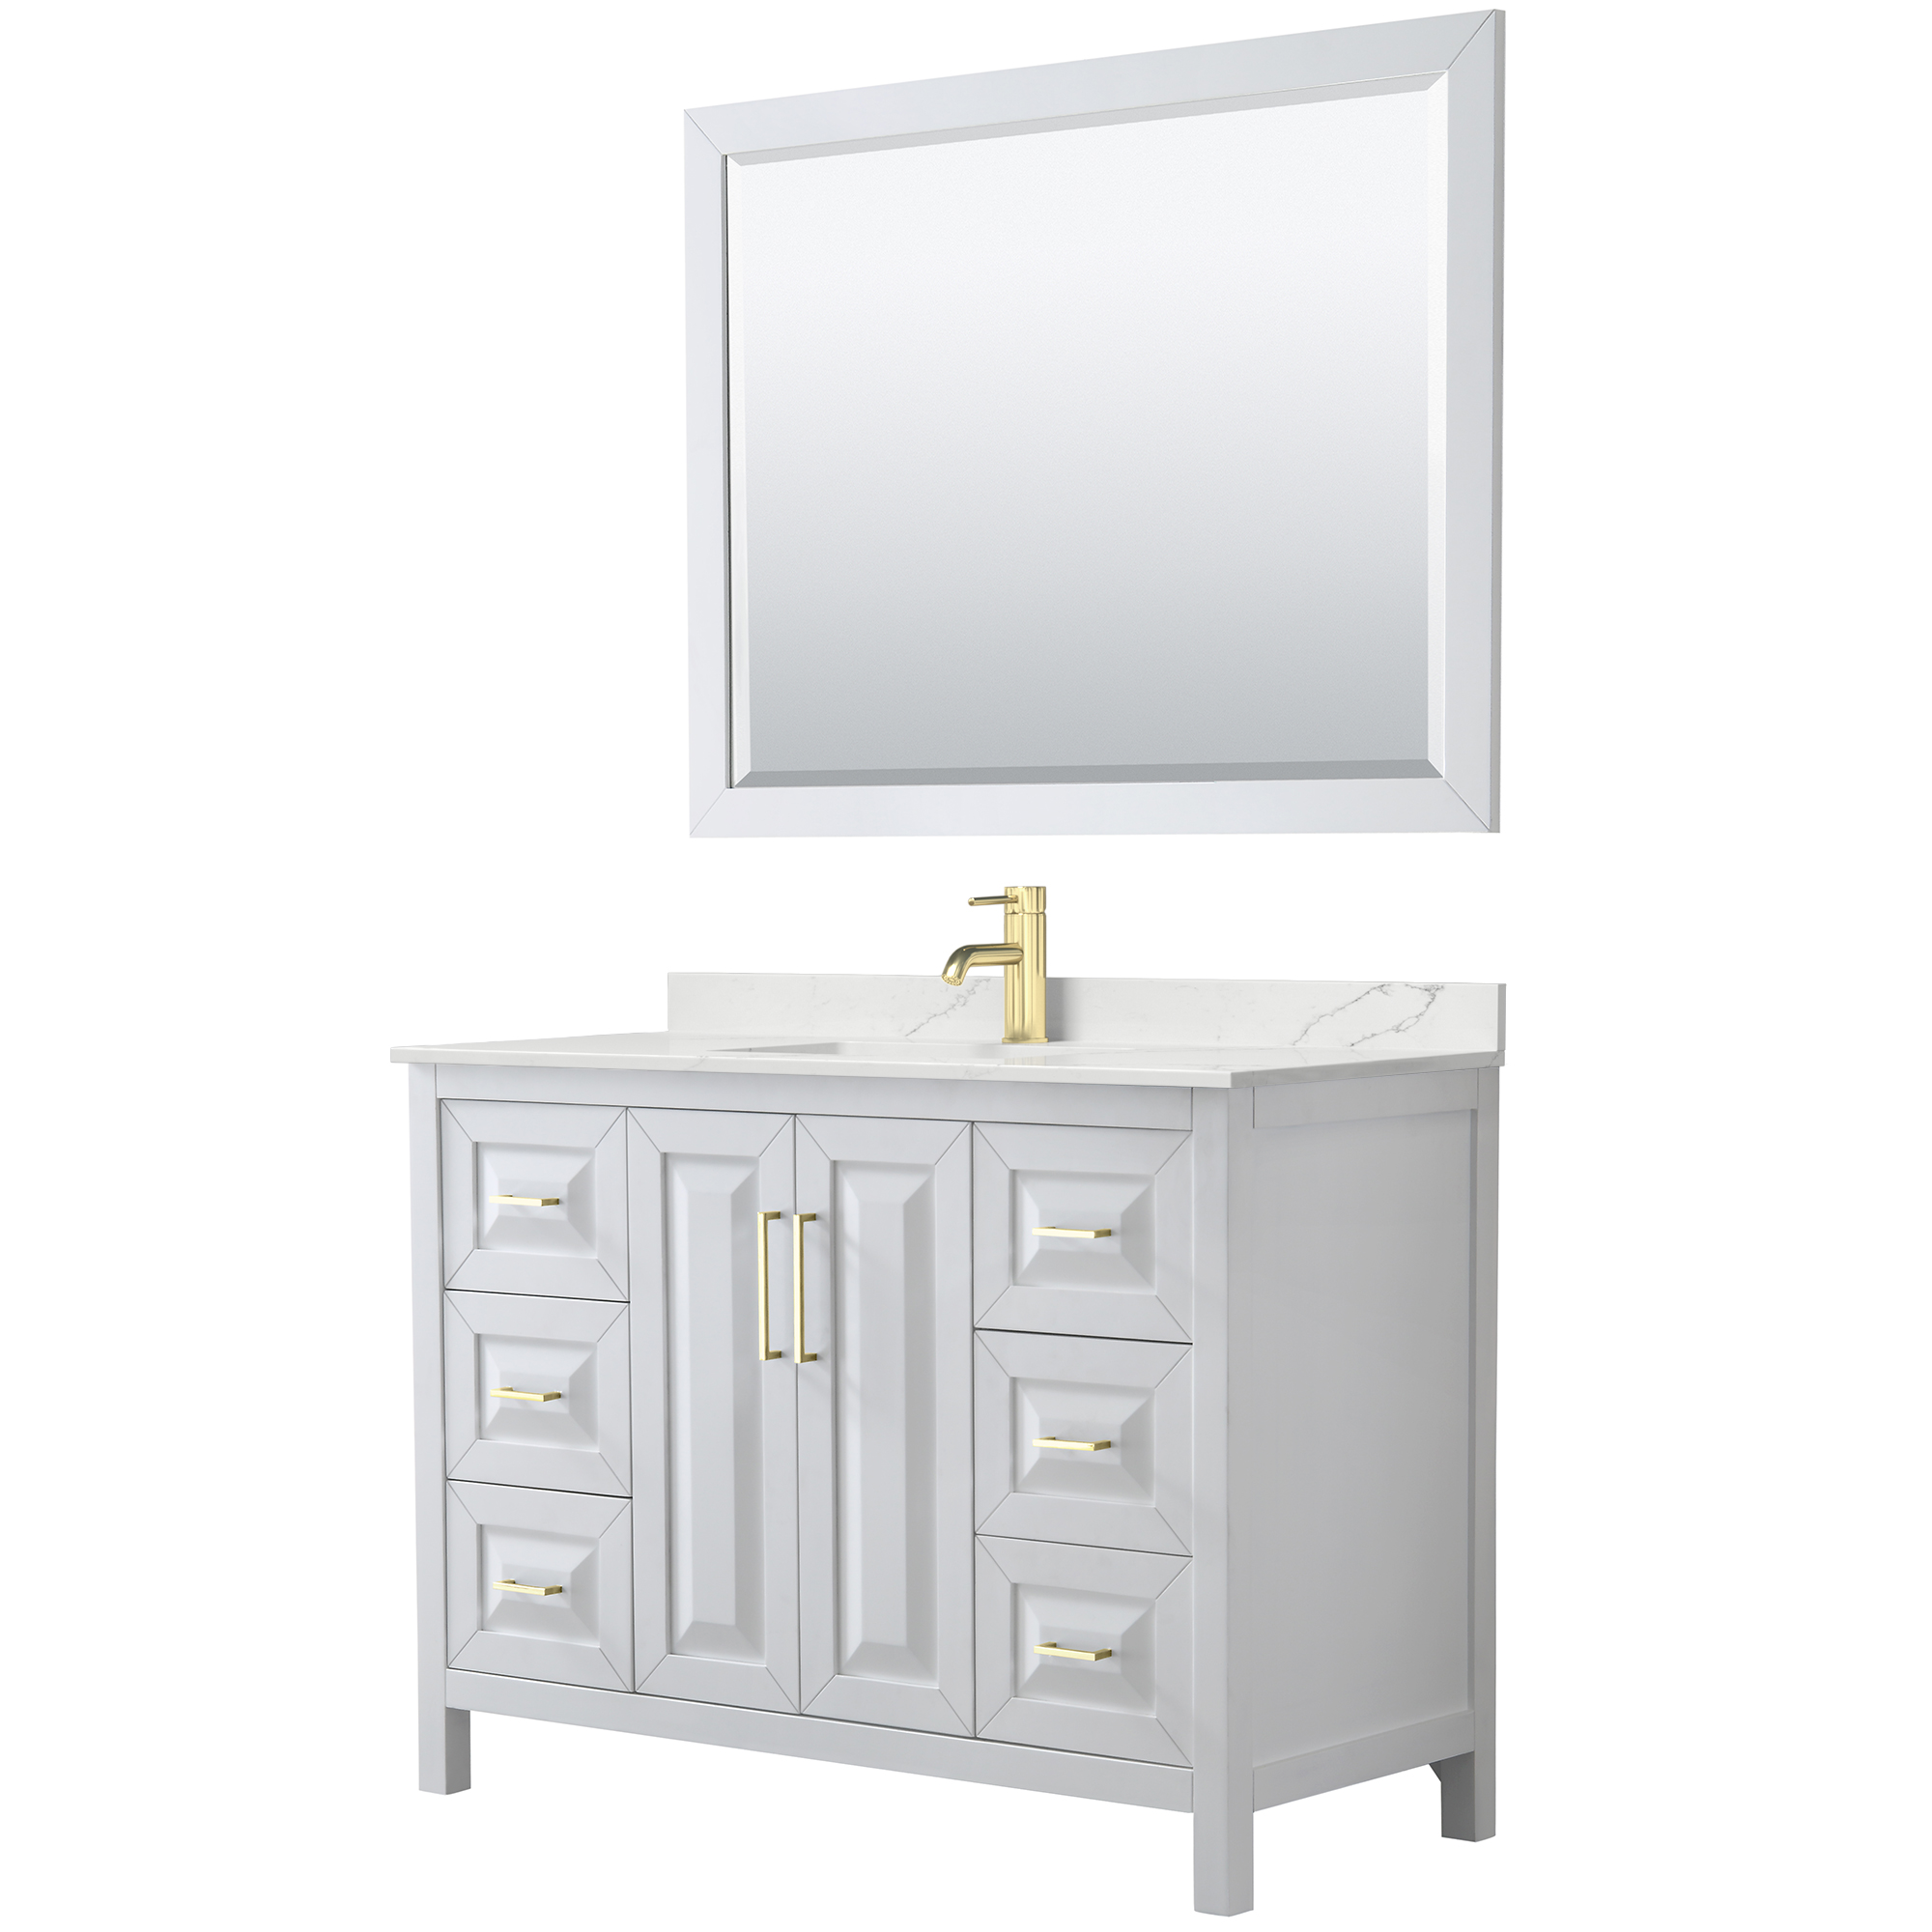 daria 48" single bathroom vanity by wyndham collection - white